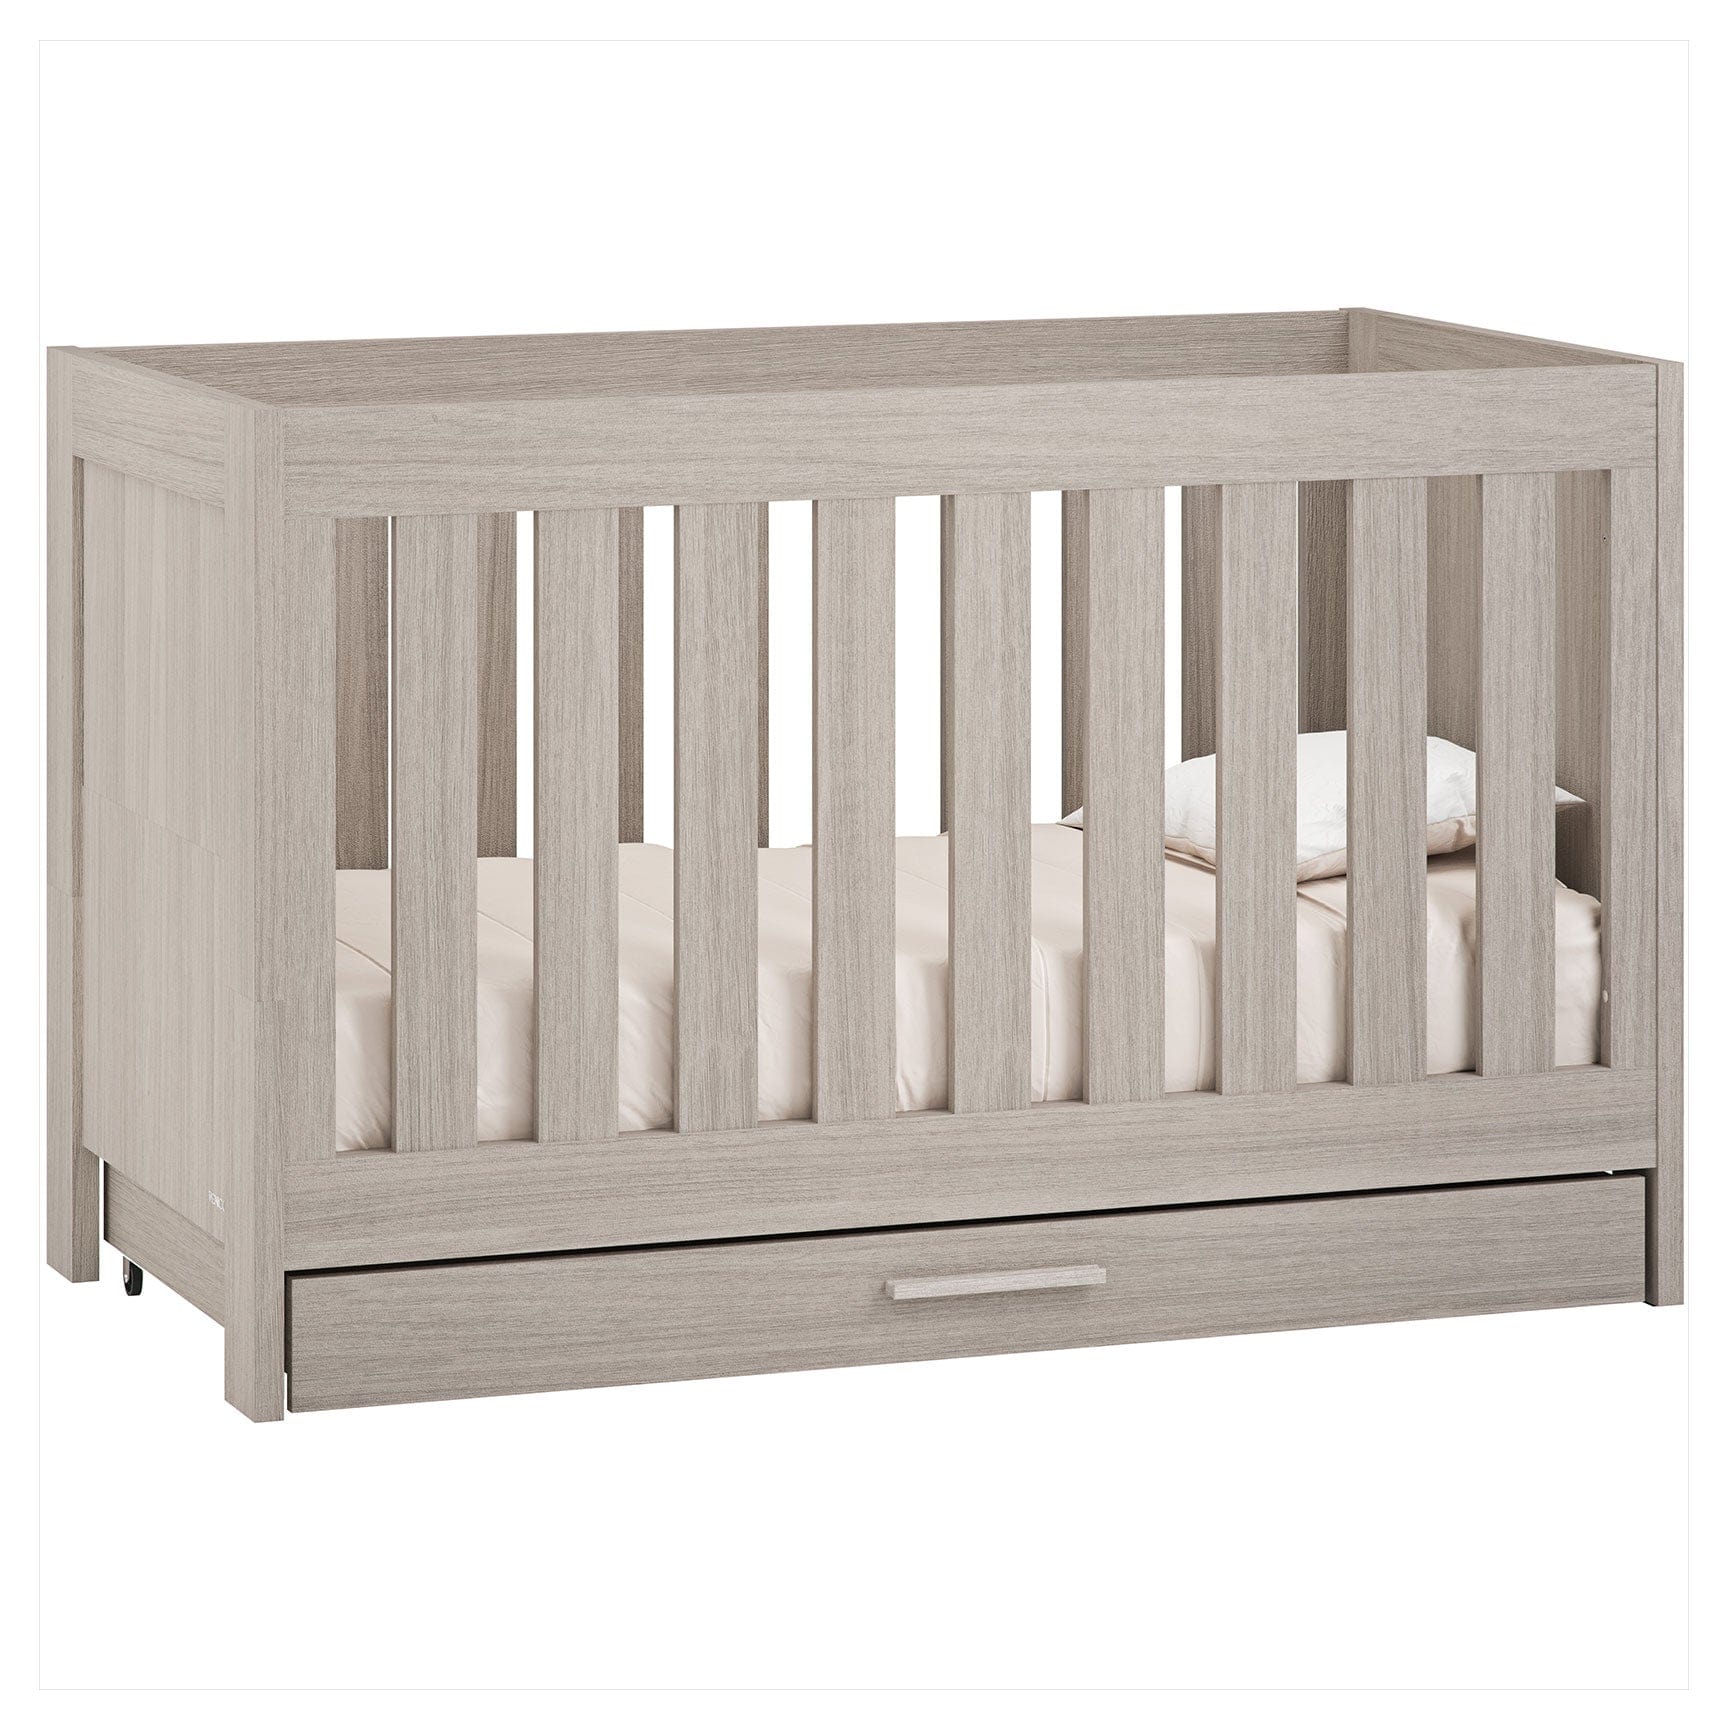 Venicci Forenzo Nordic White Oak Cot Bed with Drawer in Nordic White Cot Beds